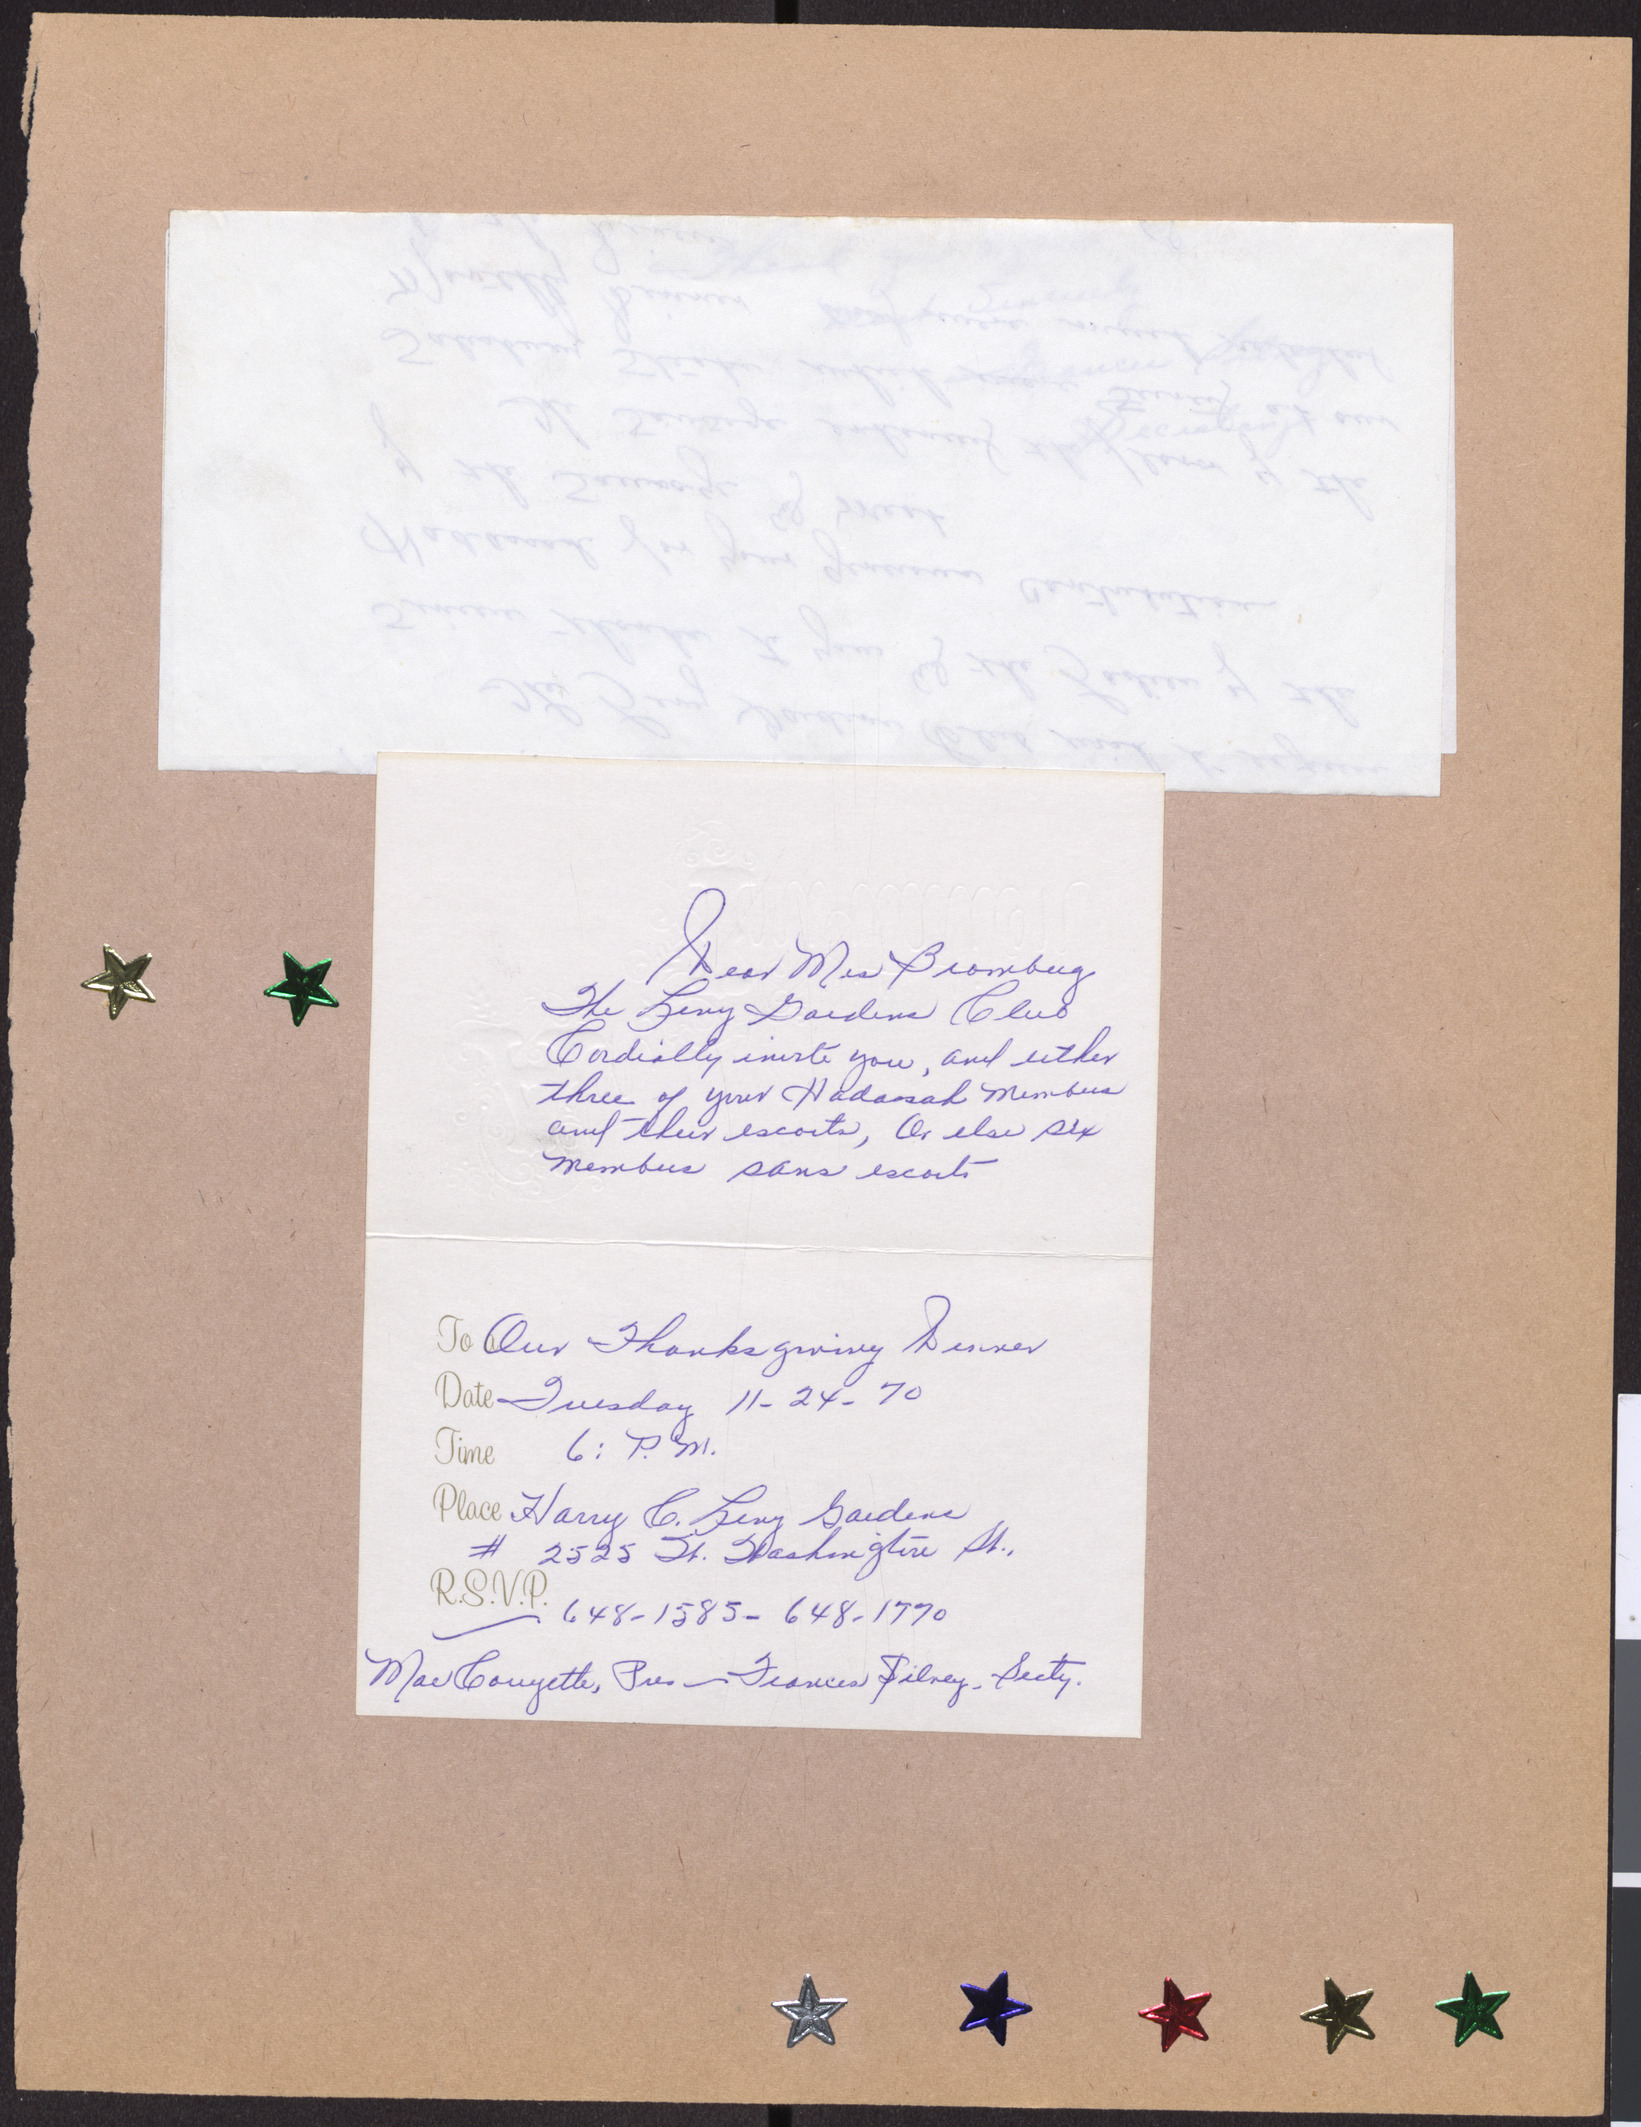 Invitation card from Mae Couyette and Frances Silney to Ellen Bromberg to Thanksgiving Dinner, November 24, 1970